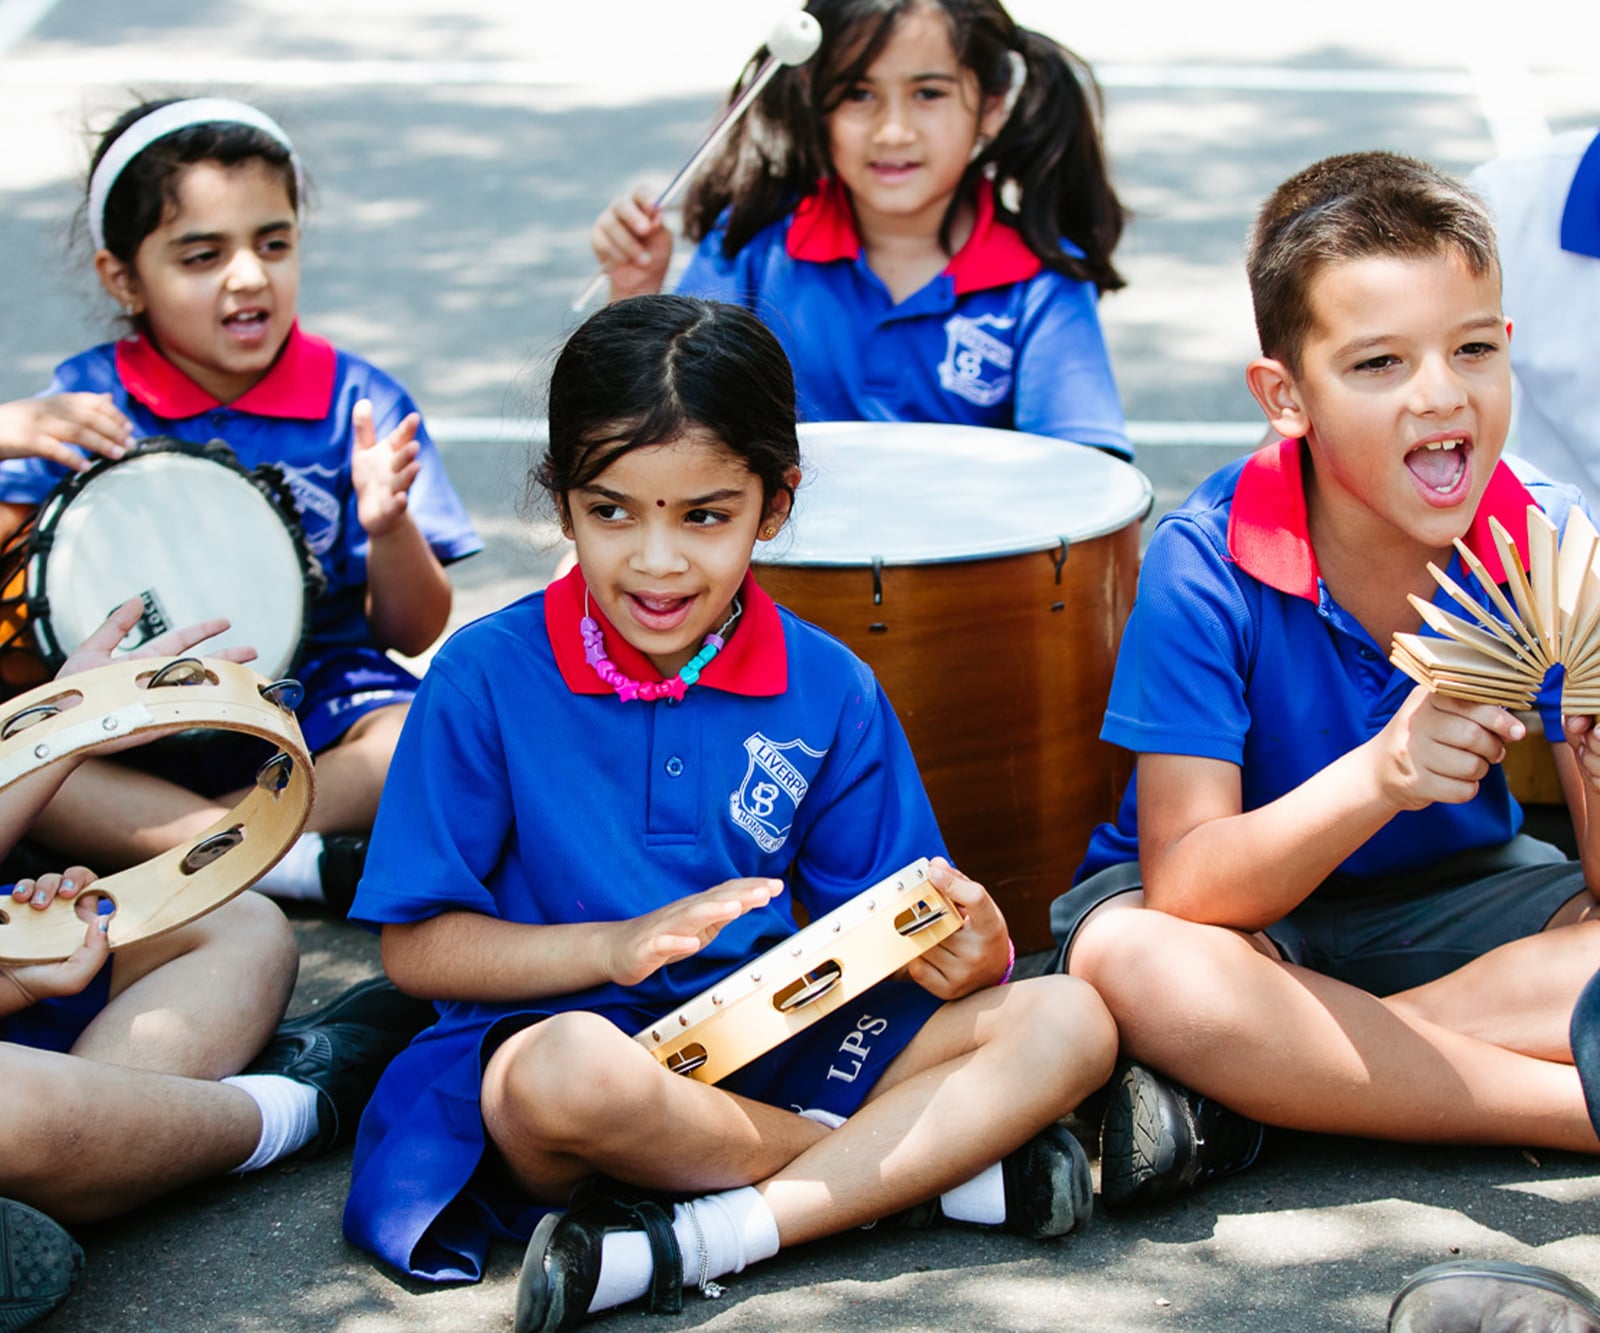 primary school students engaging in outdoor arts learning music lesson with percussion instruments